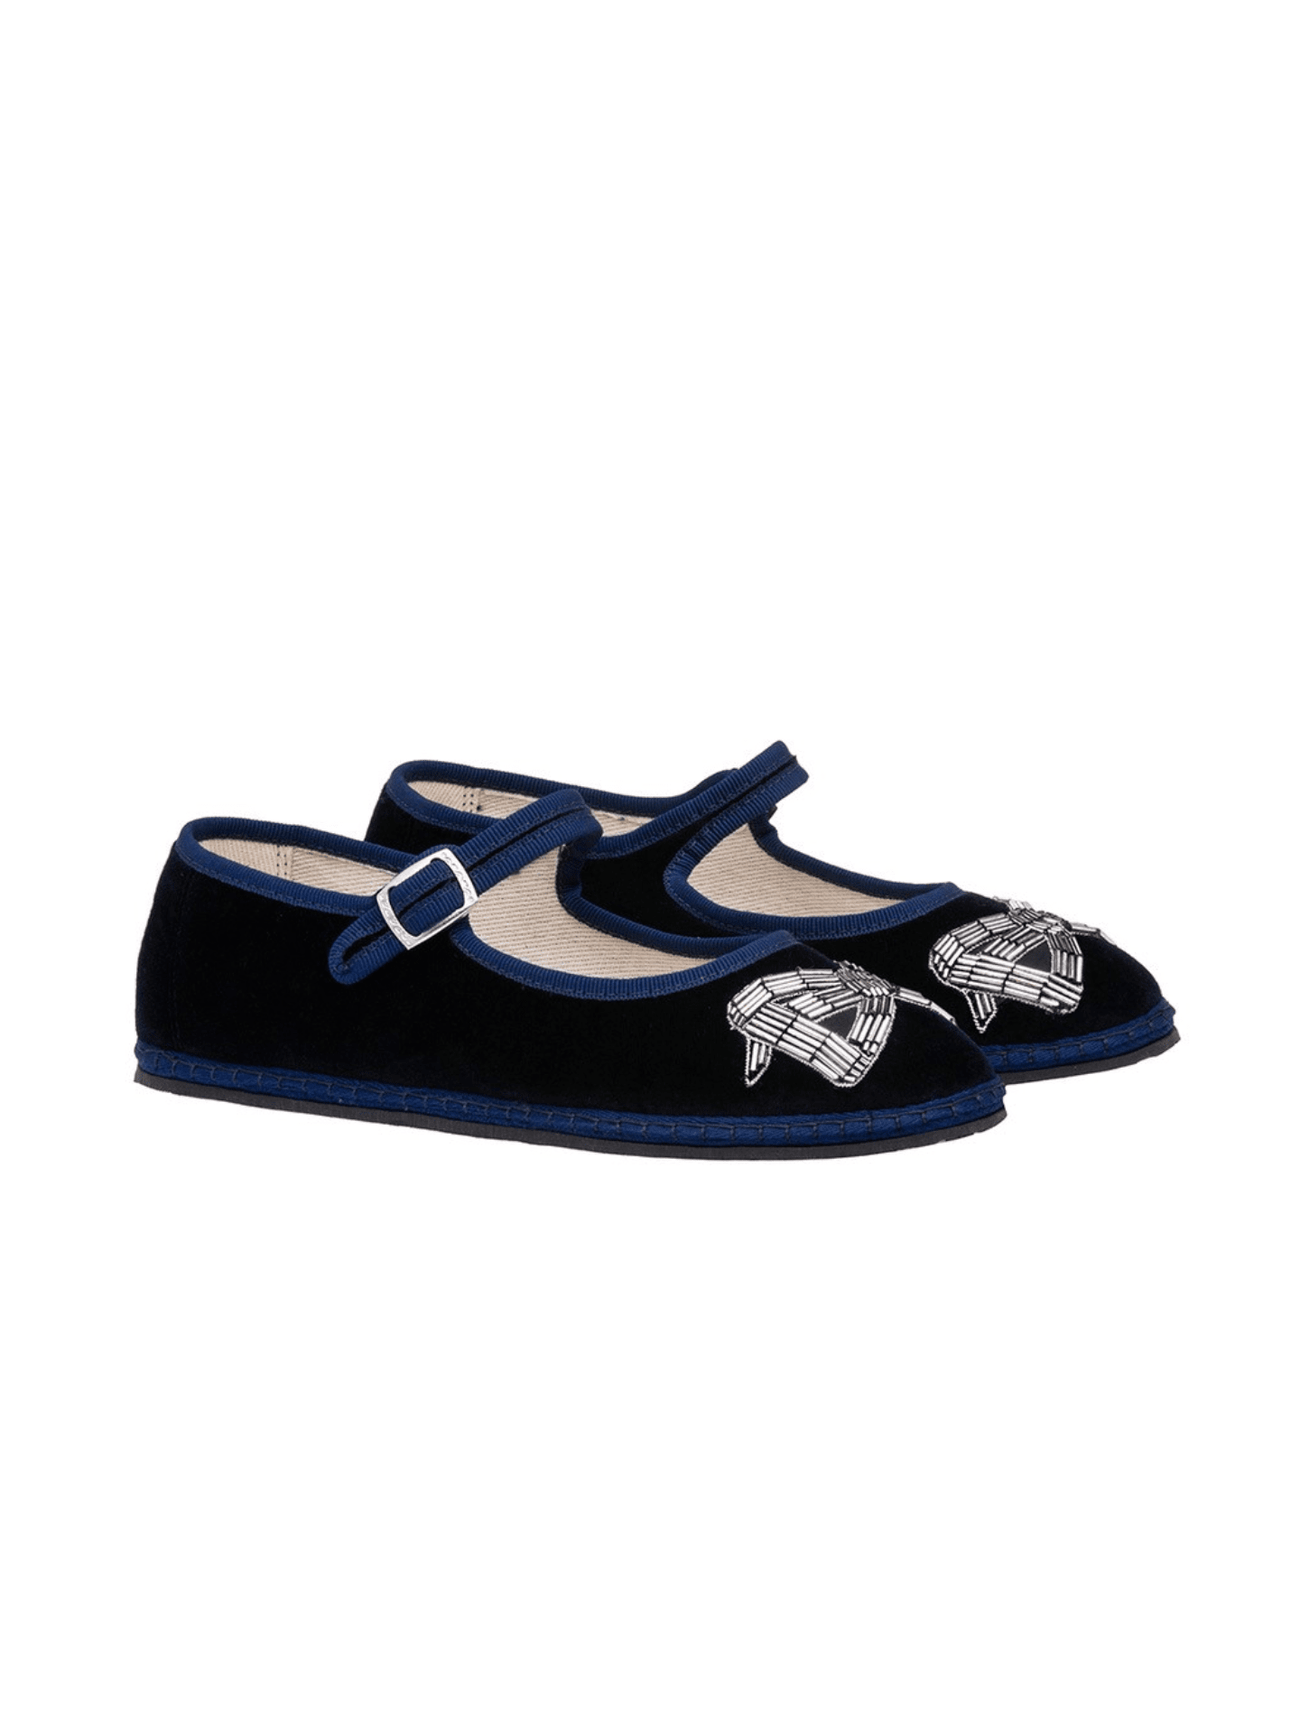 Load image into Gallery viewer, MJ Clementine Navy Bow Embroidery